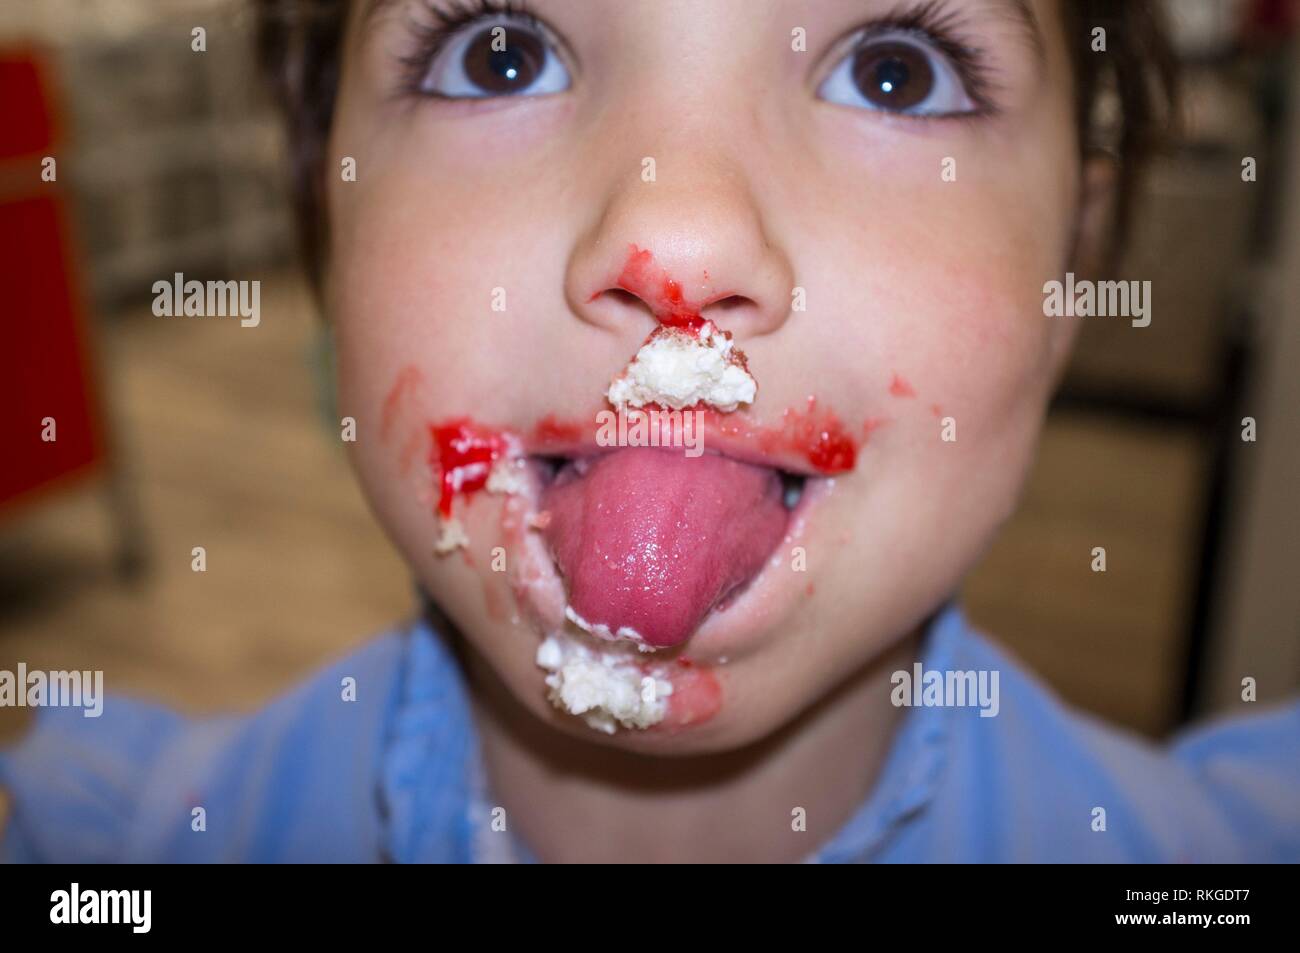 Sweet-toothed child girl licking her lips. She has the mouth full of whipped cream. Stock Photo